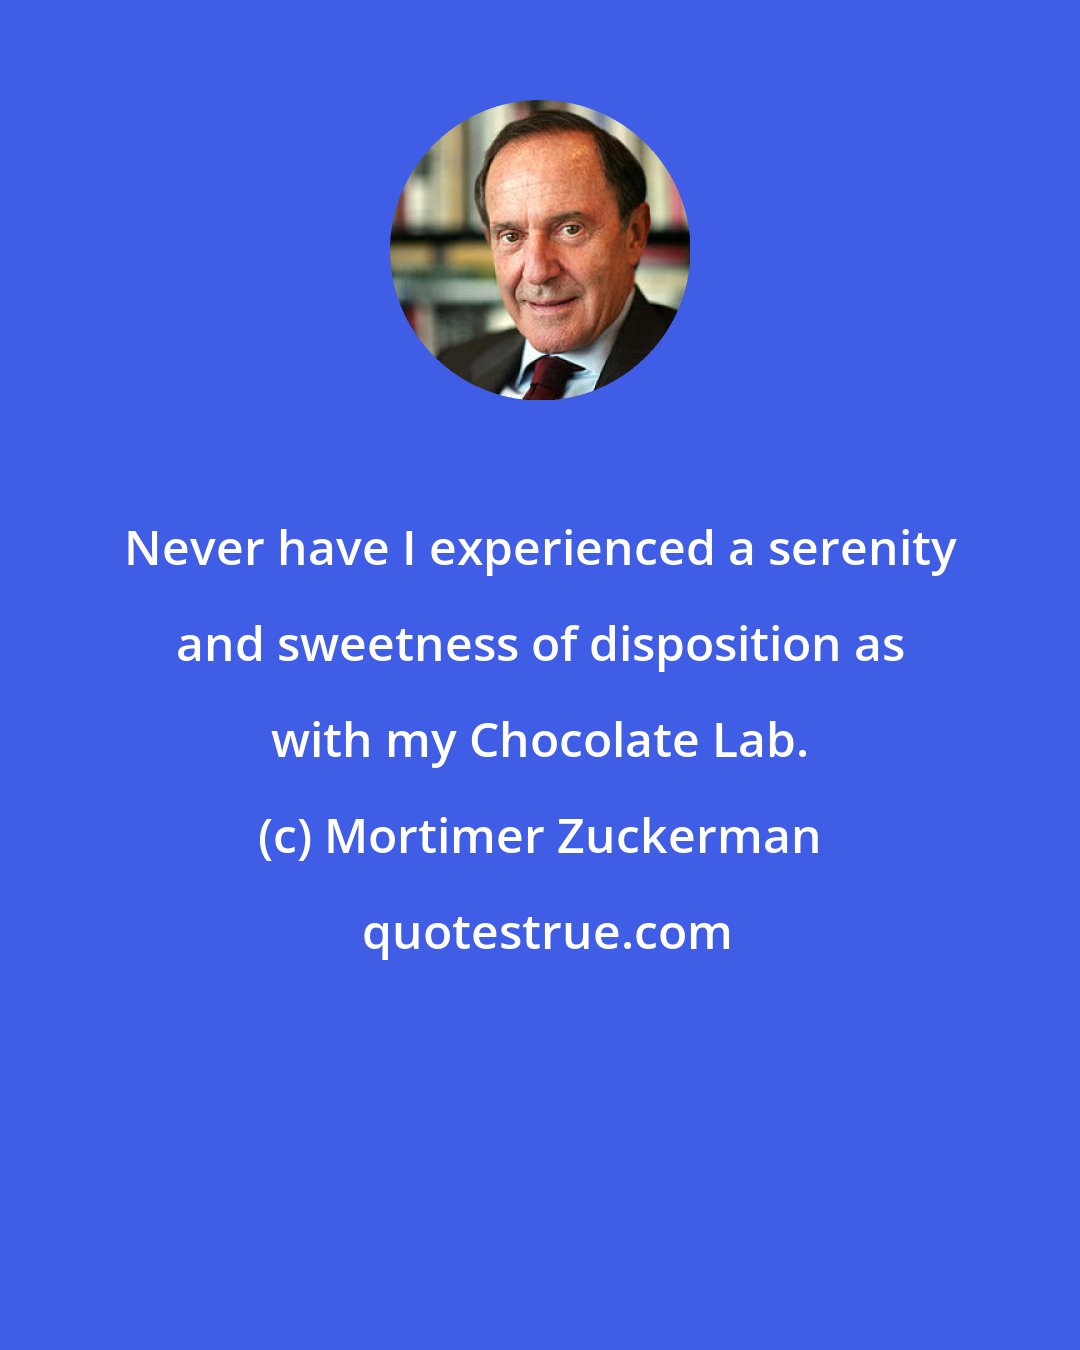 Mortimer Zuckerman: Never have I experienced a serenity and sweetness of disposition as with my Chocolate Lab.